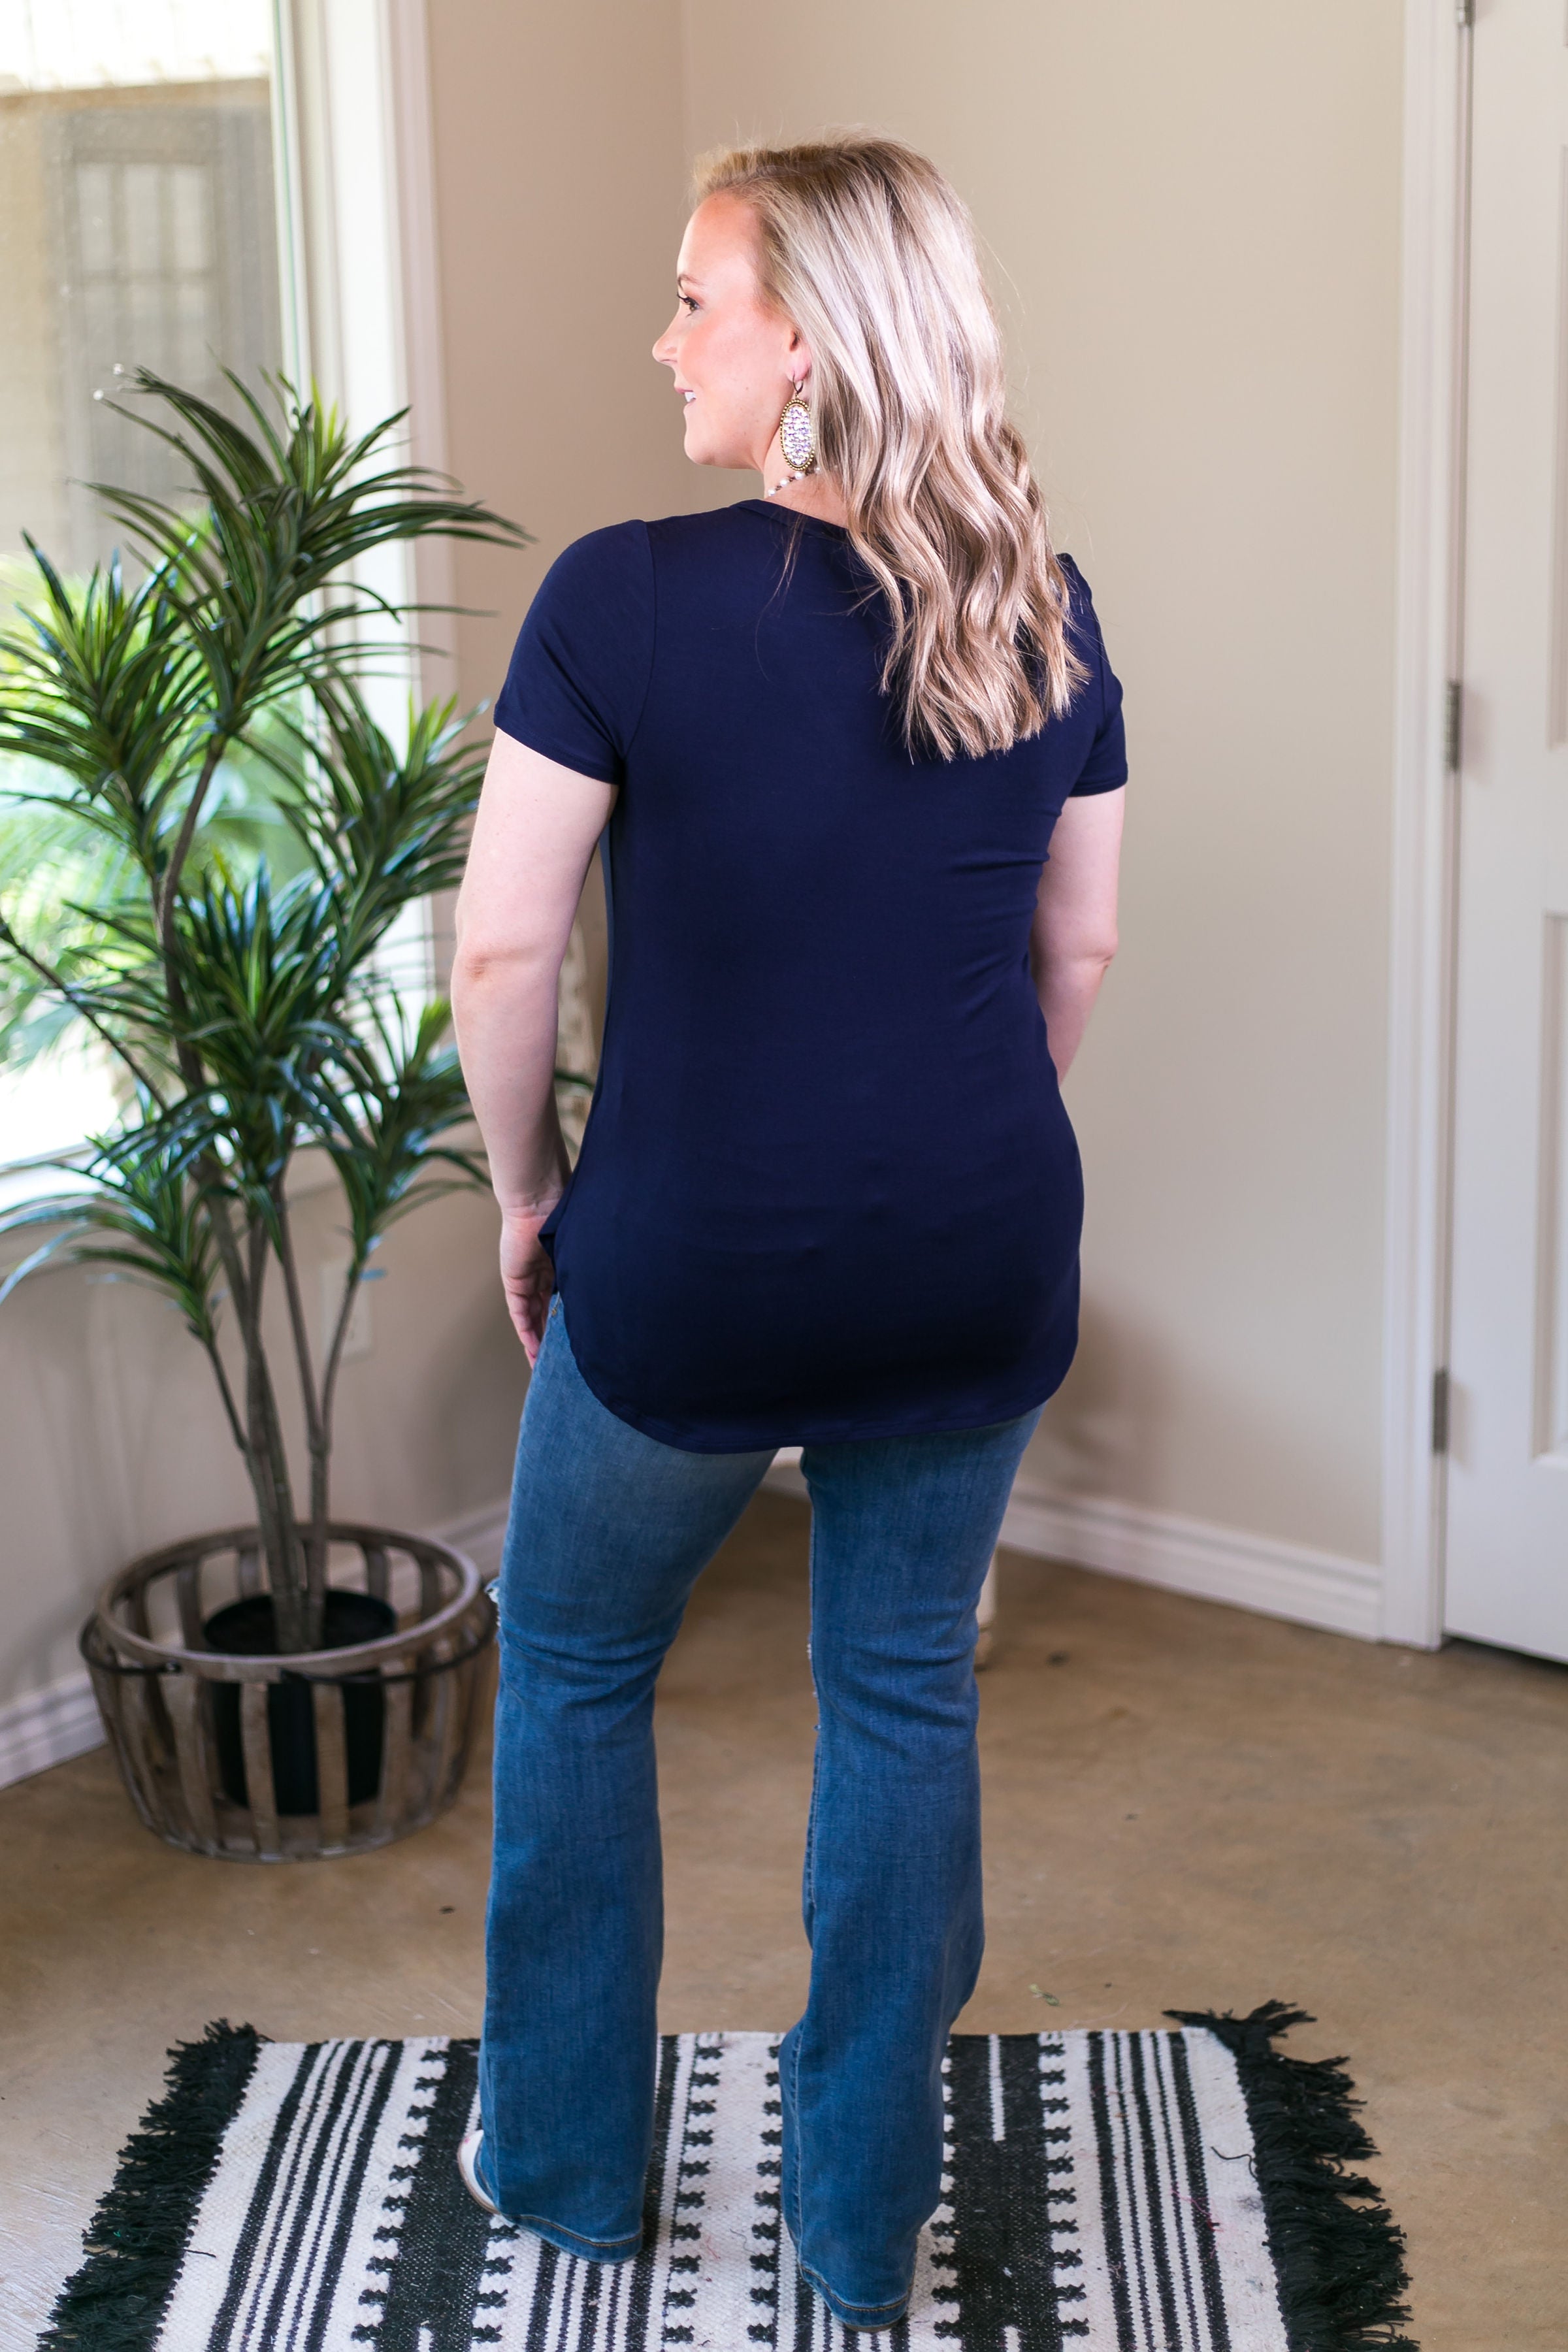 Simply The Best V Neck Short Sleeve Tee Shirt in Navy Blue - Giddy Up Glamour Boutique